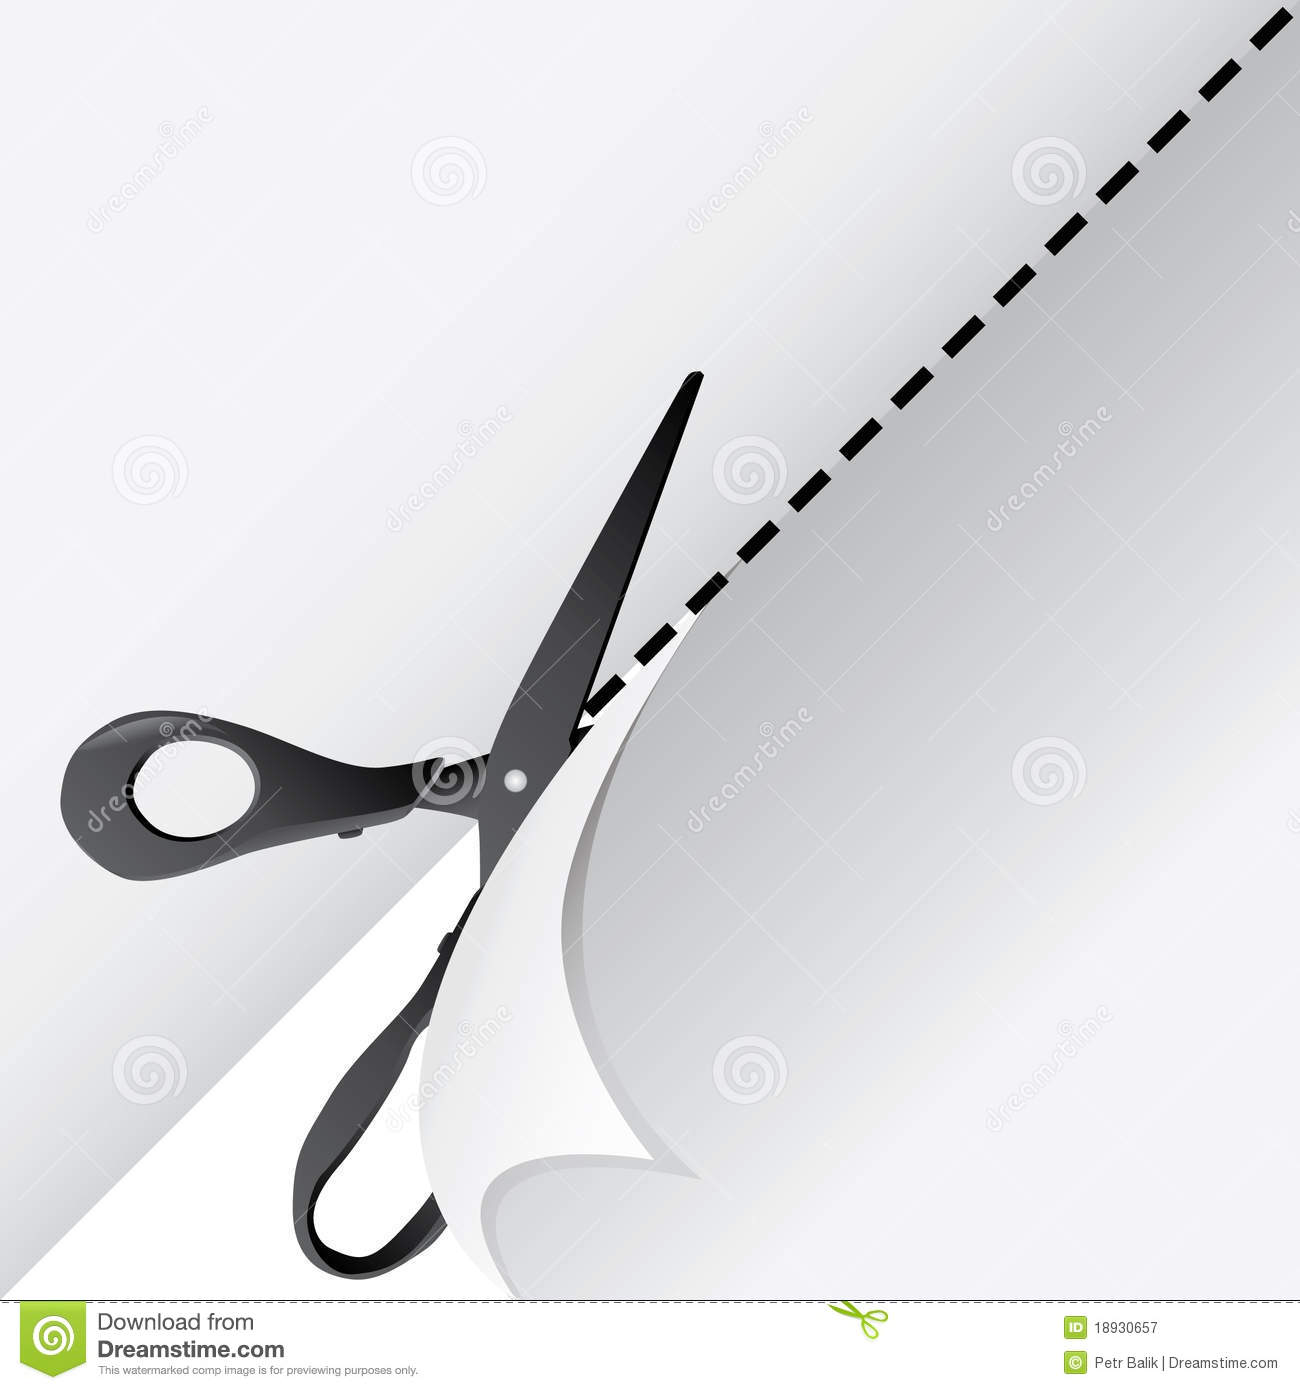 Scissors Cut Paper Royalty Free Stock Photography   Image  18930657